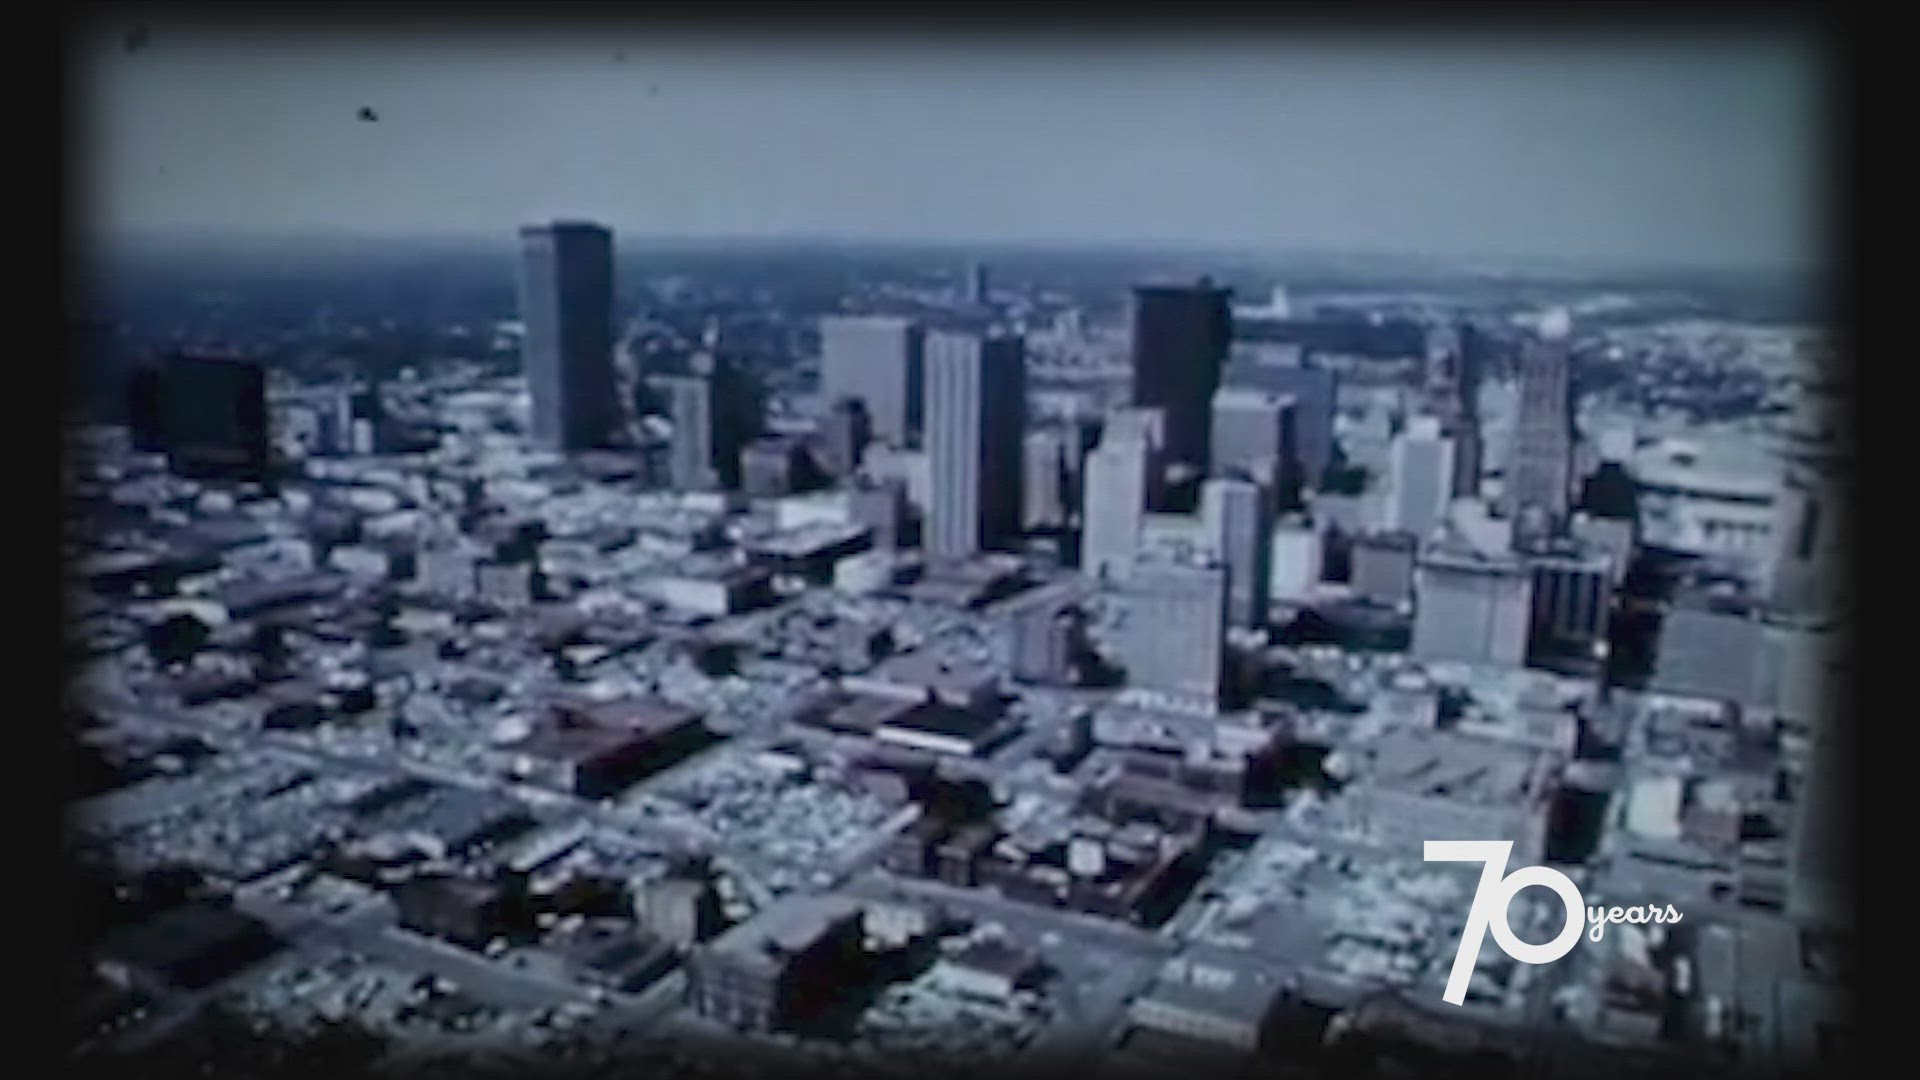 On March 22, KHOU 11 turns 70 years old. All this year, we're looking back on the history of and our coverage of Houston over those decades.